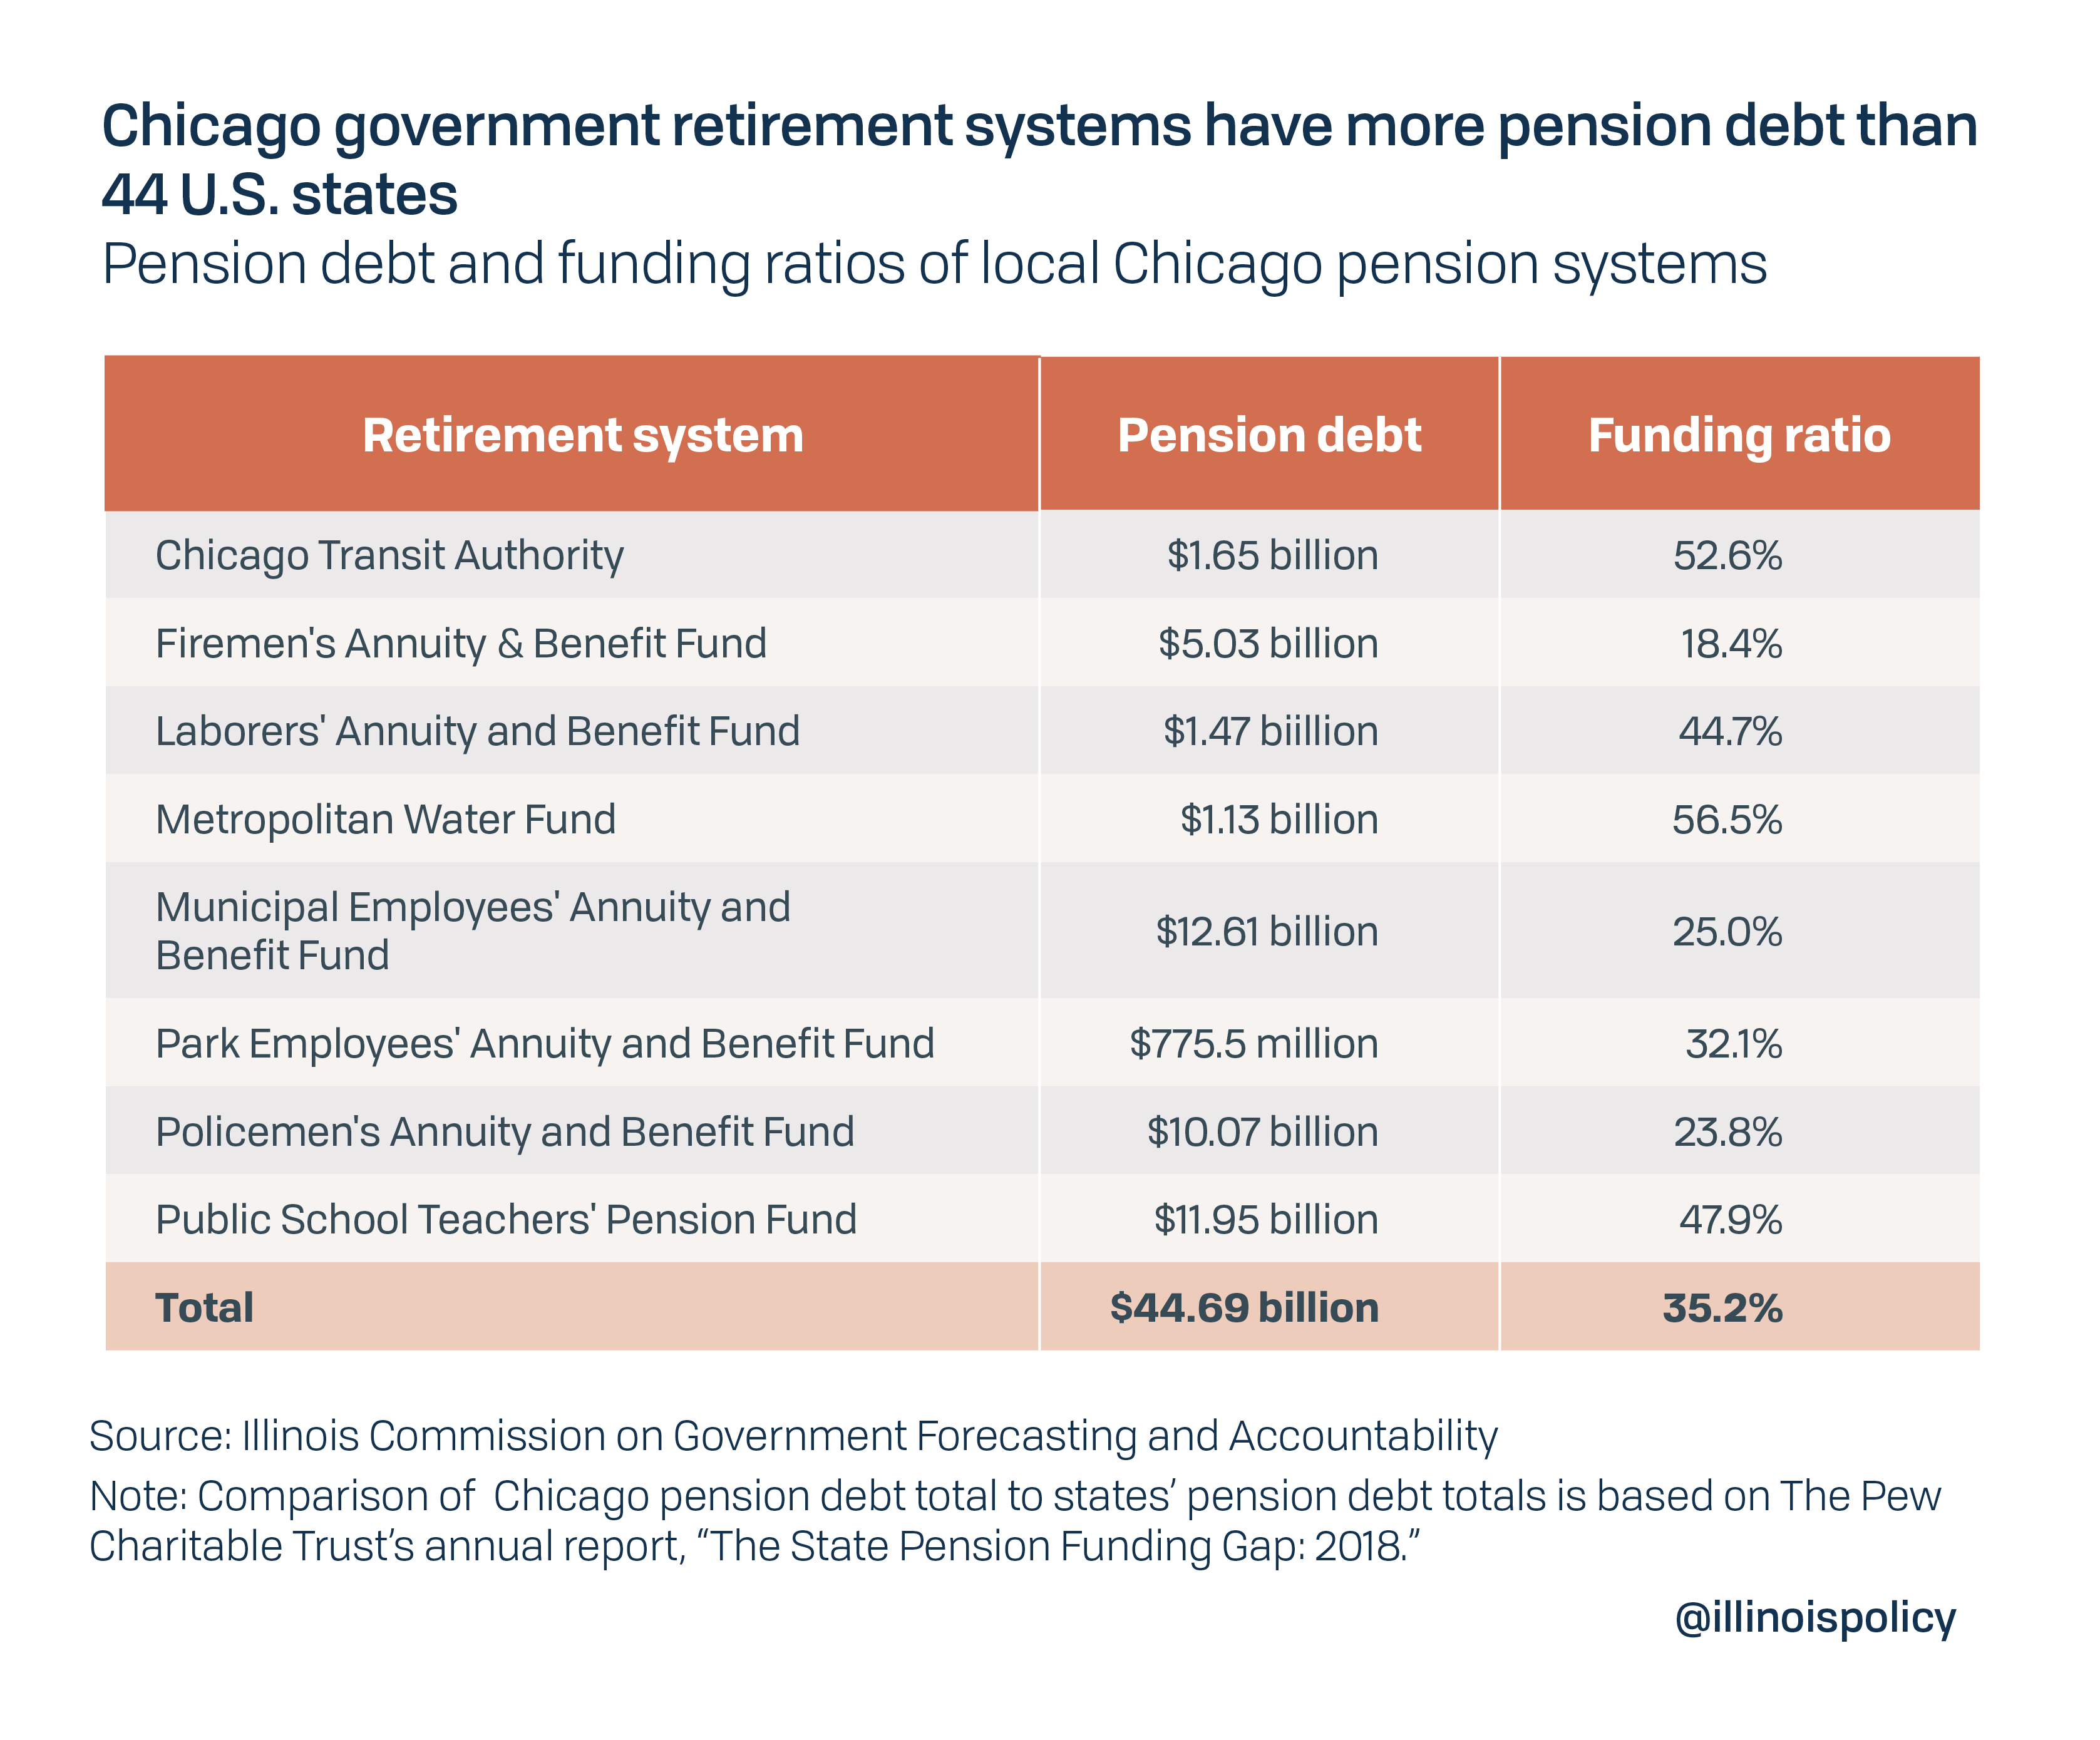 Chicago government pension systems have more debt than 44 U.S. states